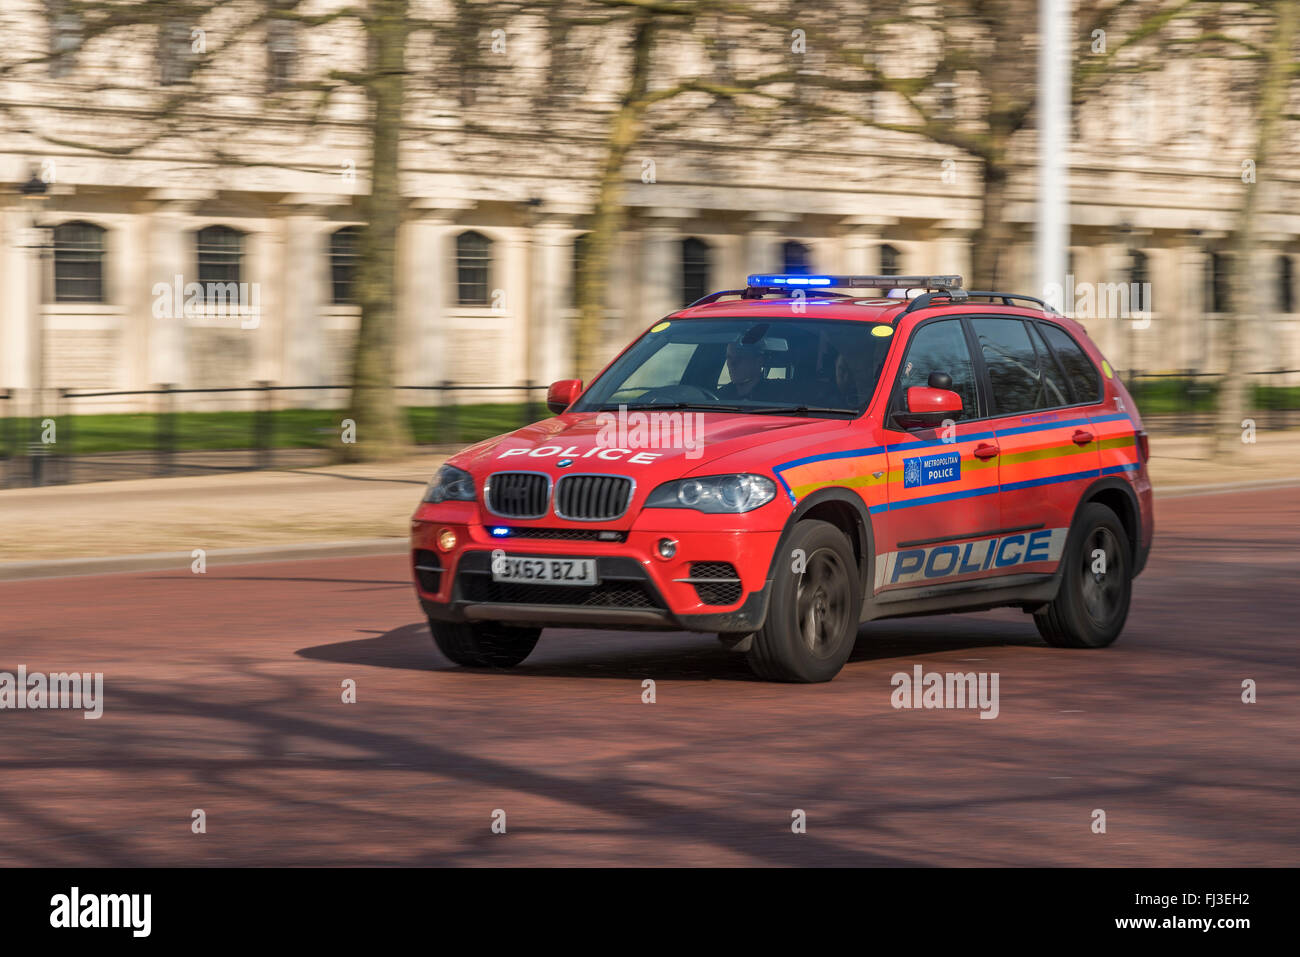 A Red BMW Police Car, belonging to the Metropolitan Police Service Diplomatic Protection Group, races along The Mall, London. Stock Photo